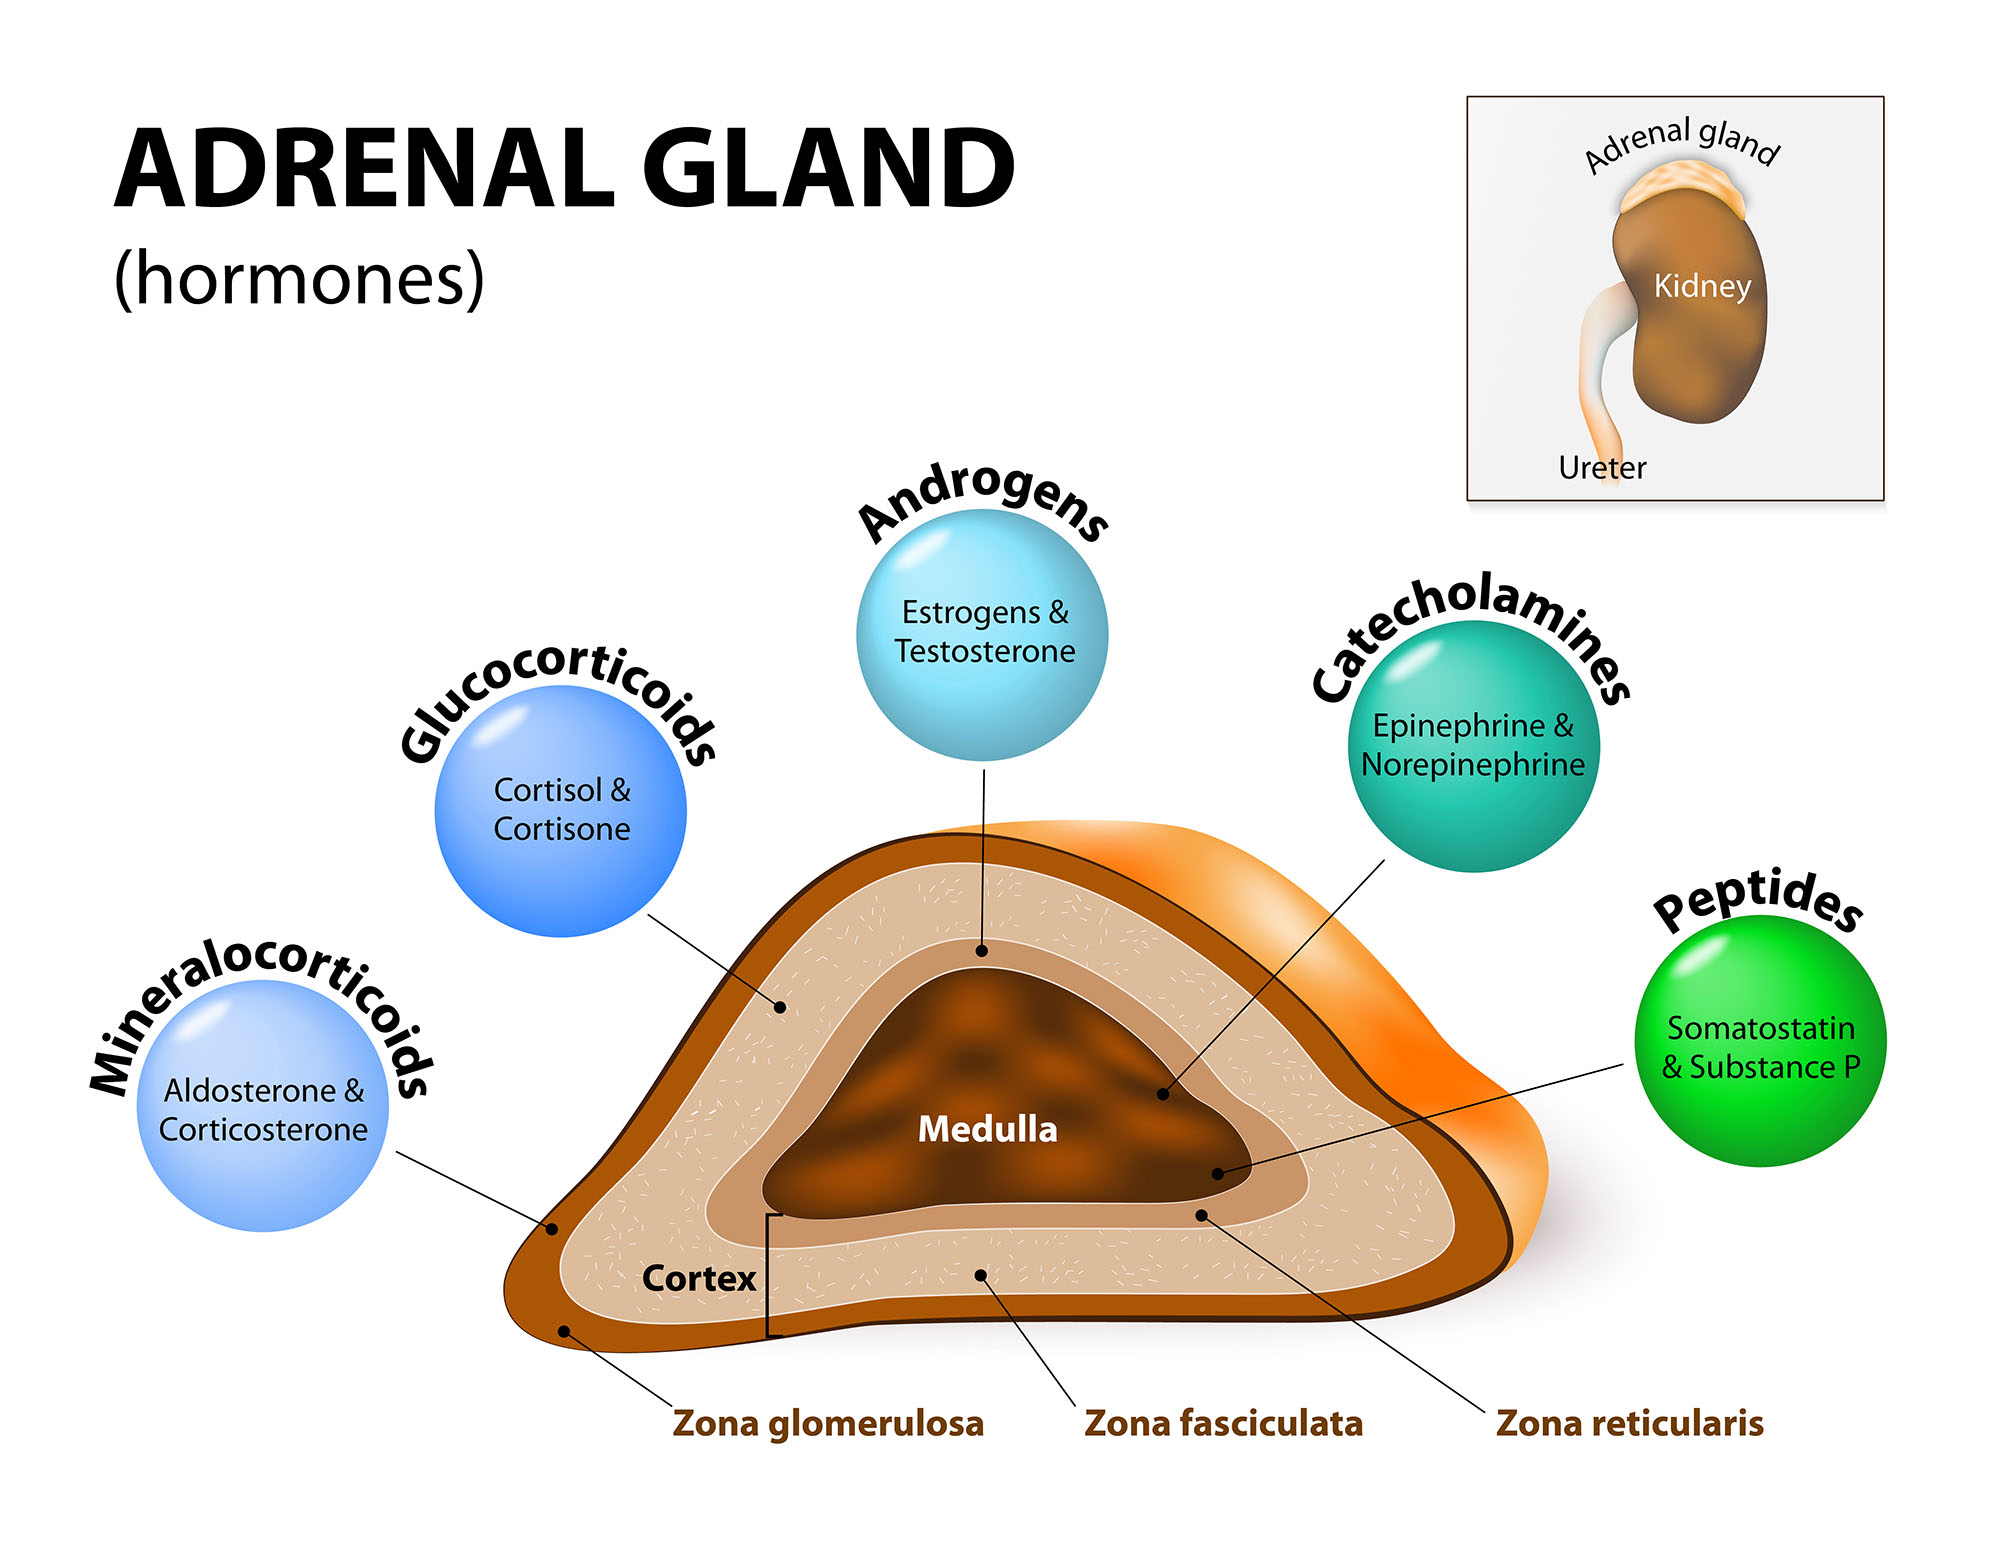 hormones produced by the adrenal glands